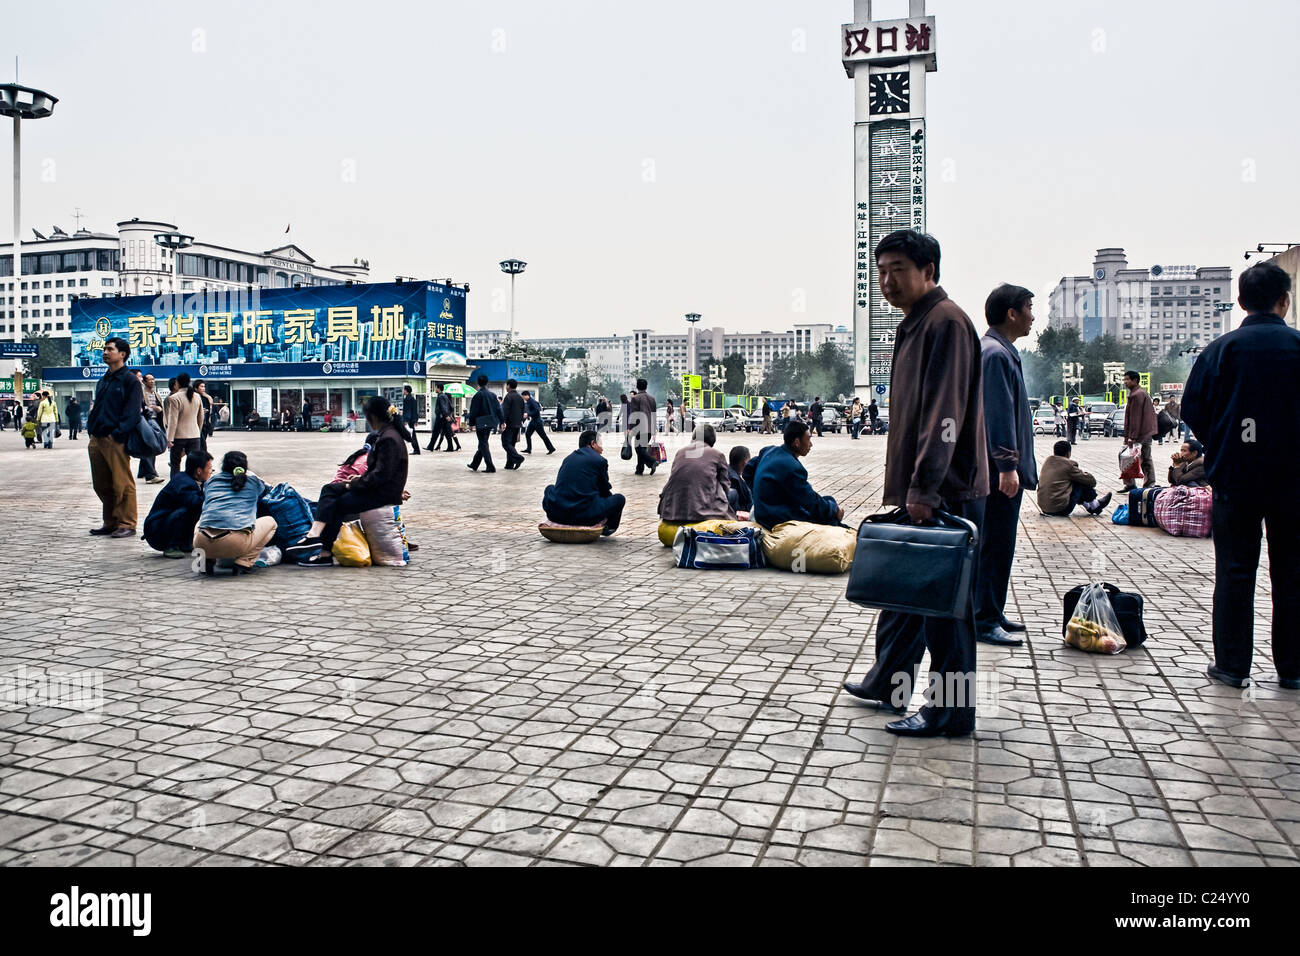 CHINA, WUHAN: Hankou Railway Station in Wuhan with plaza and people waiting for trains with their luggage. Photo Illustration. Stock Photo